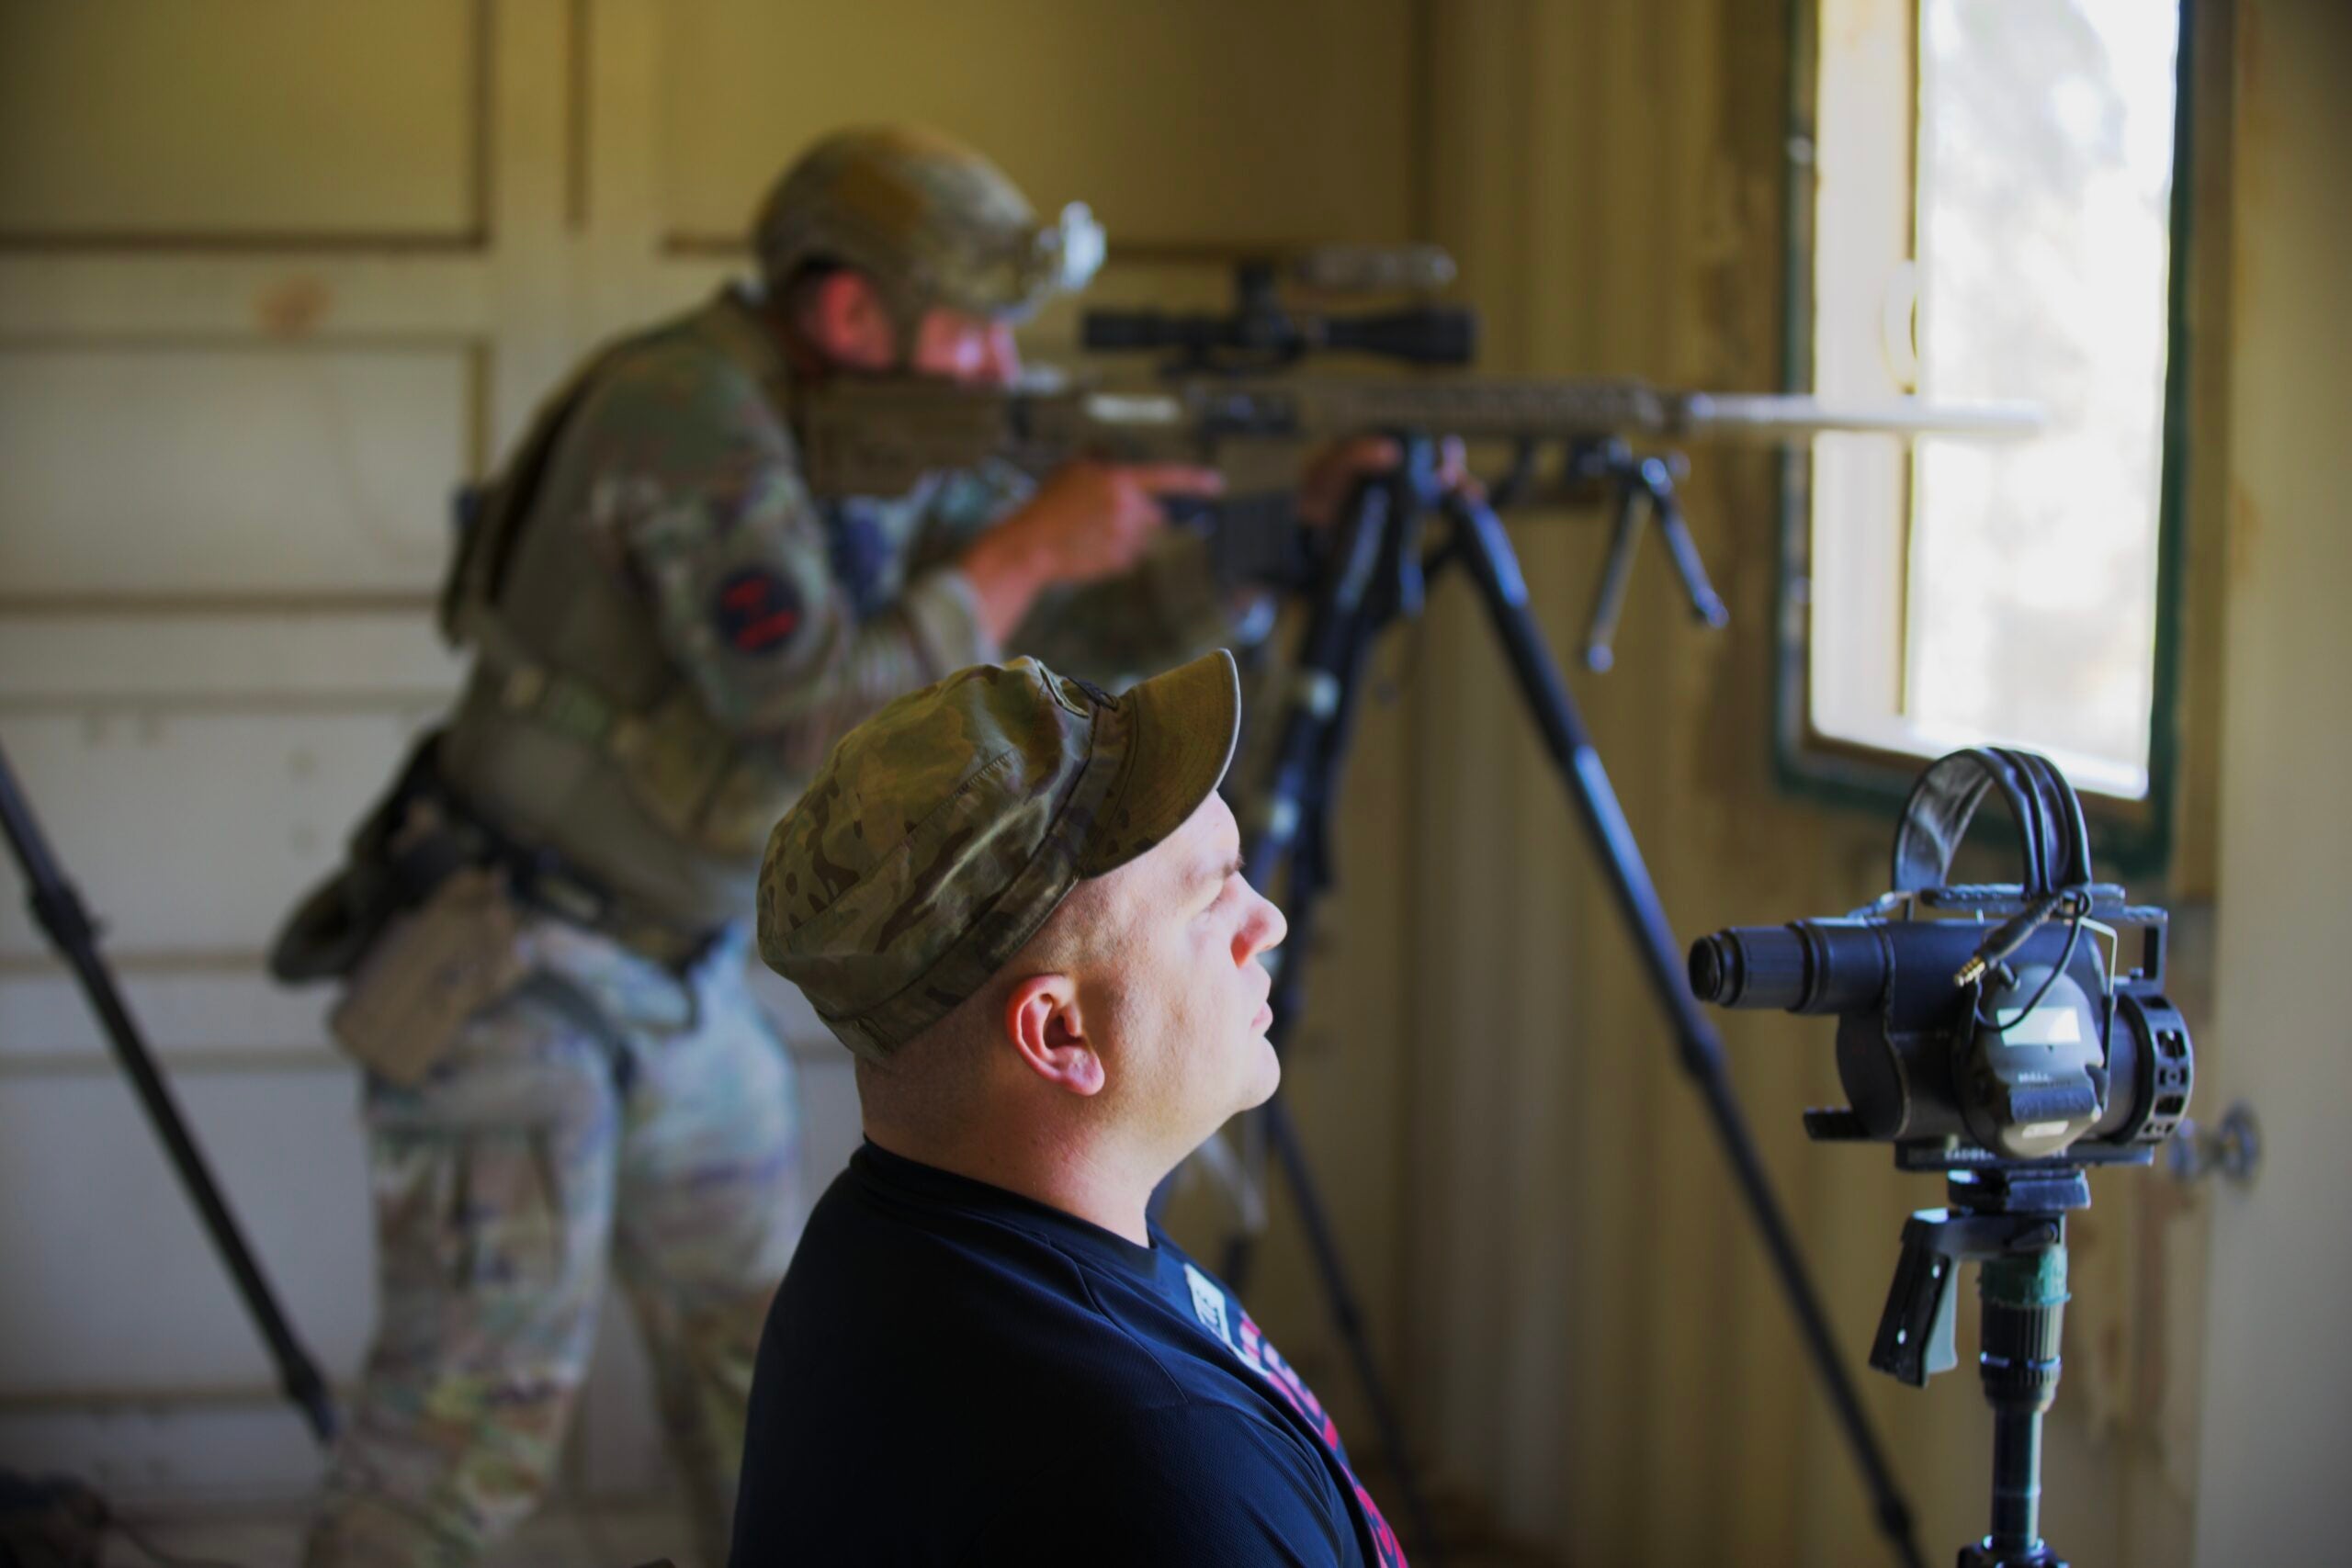 Snipers need commanders to learn how to use them